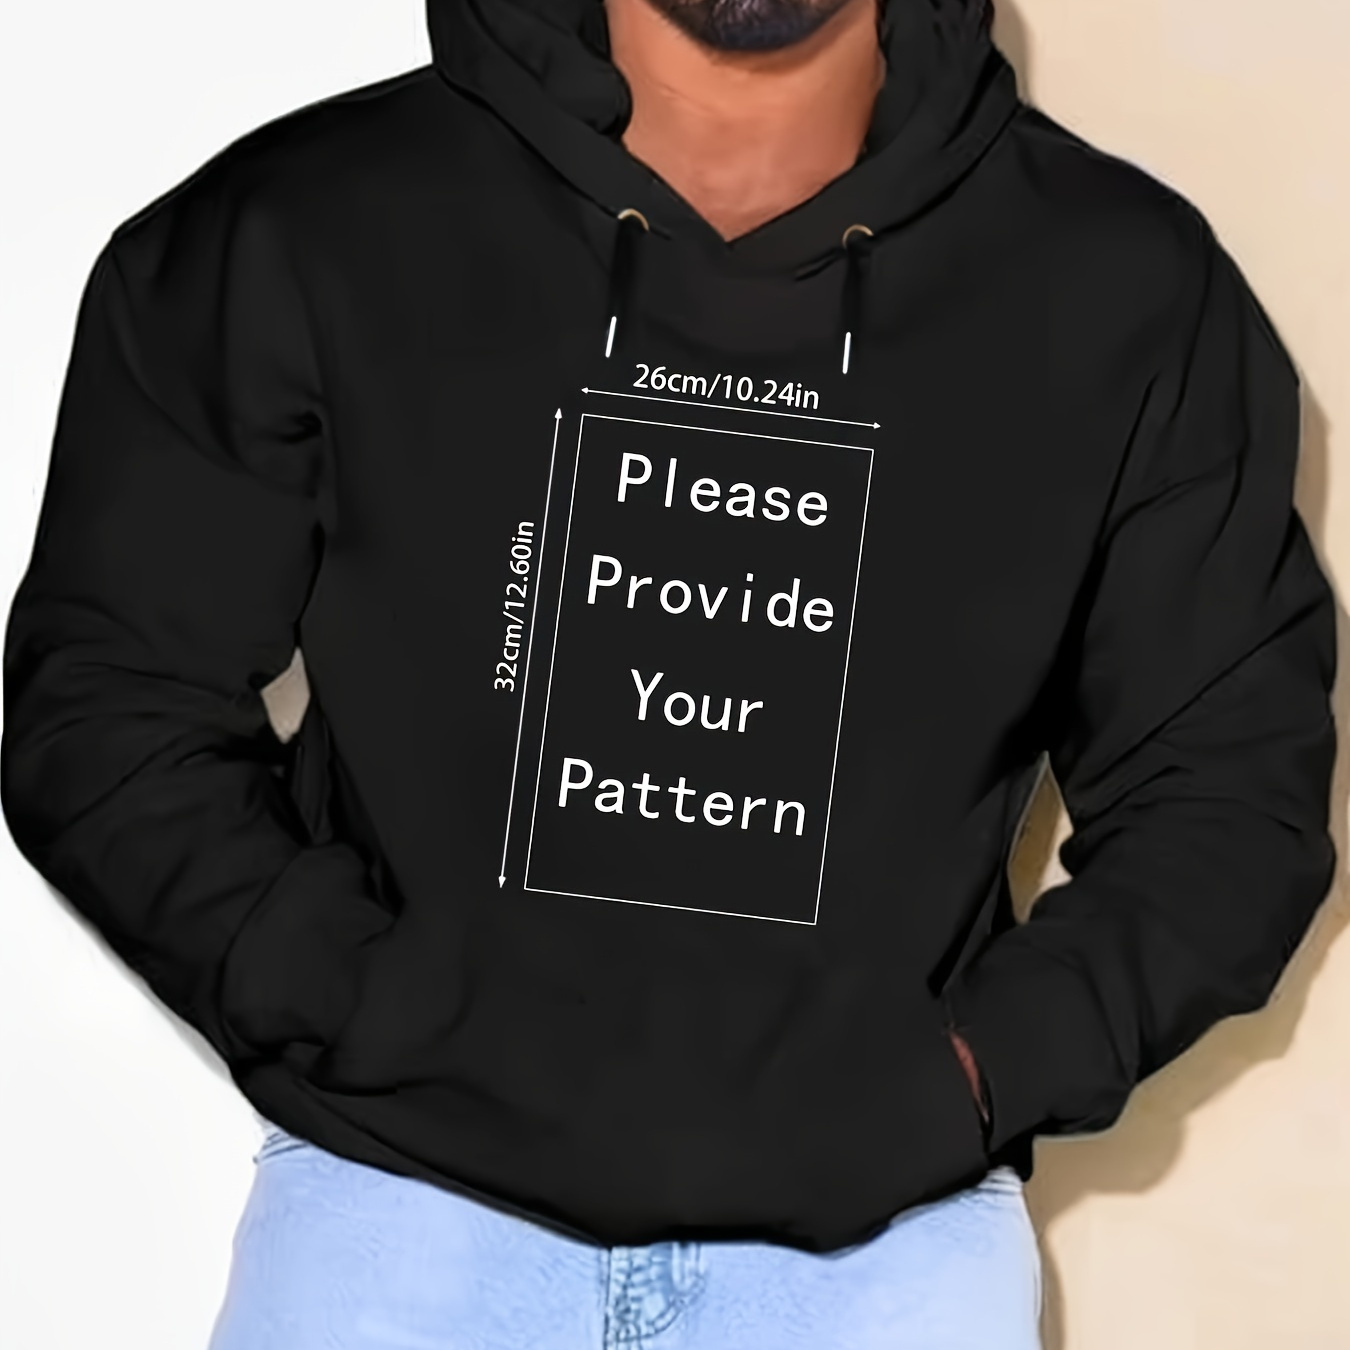 

Plus Size Men's Personalized Hoodie With Kangaroo Pocket, Casual Breathable Long Sleeve Customize Hooded Sweatshirt For Outdoor, Men's Clothing